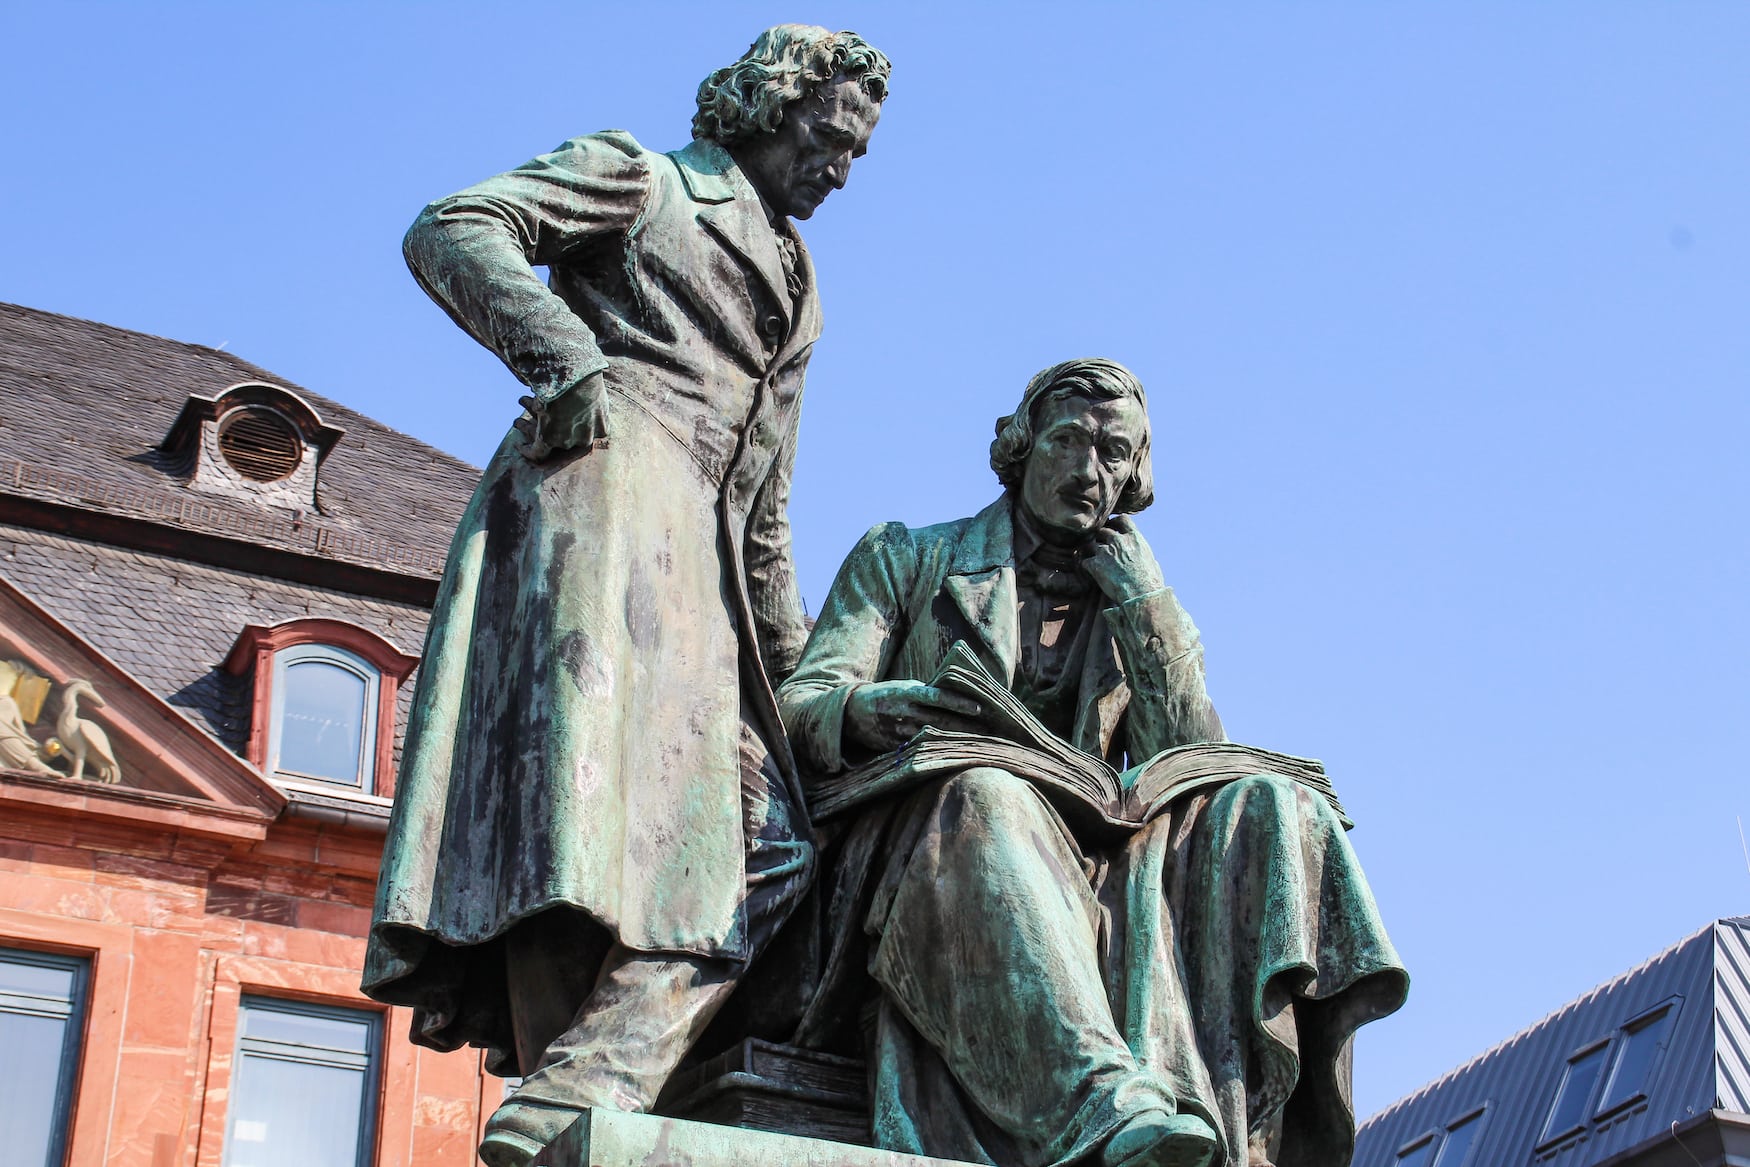 famous Grimm Brothers in the city center of the Hanau, Germany